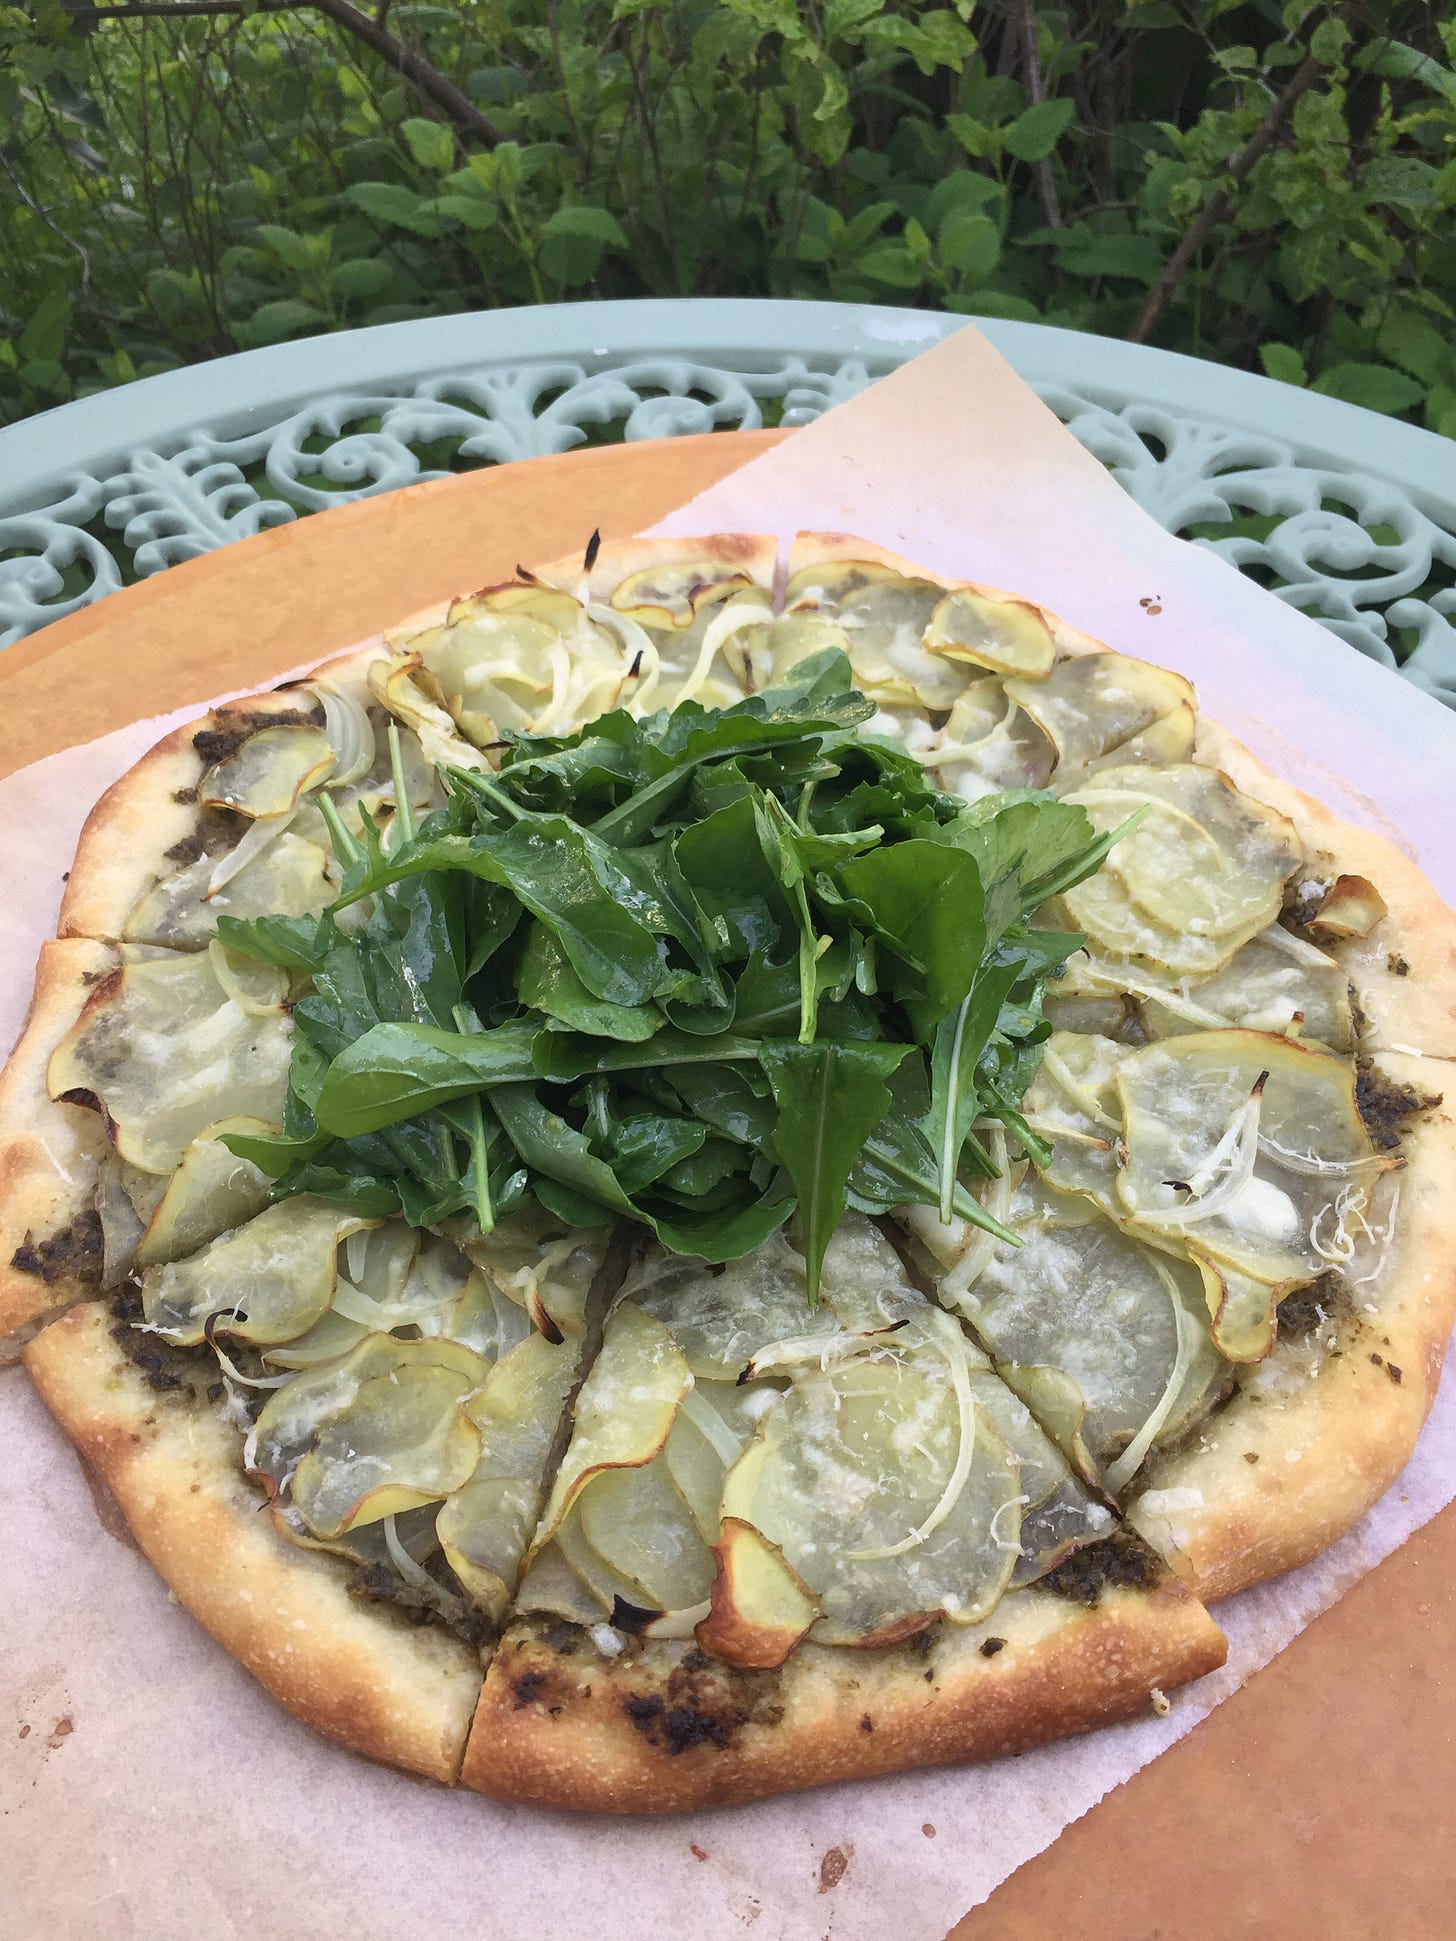 On a mint green wrought-iron table is a wooden pizza peel with a potato pizza on a piece of parchment. In the centre of the pizza is a large pile of arugula salad.